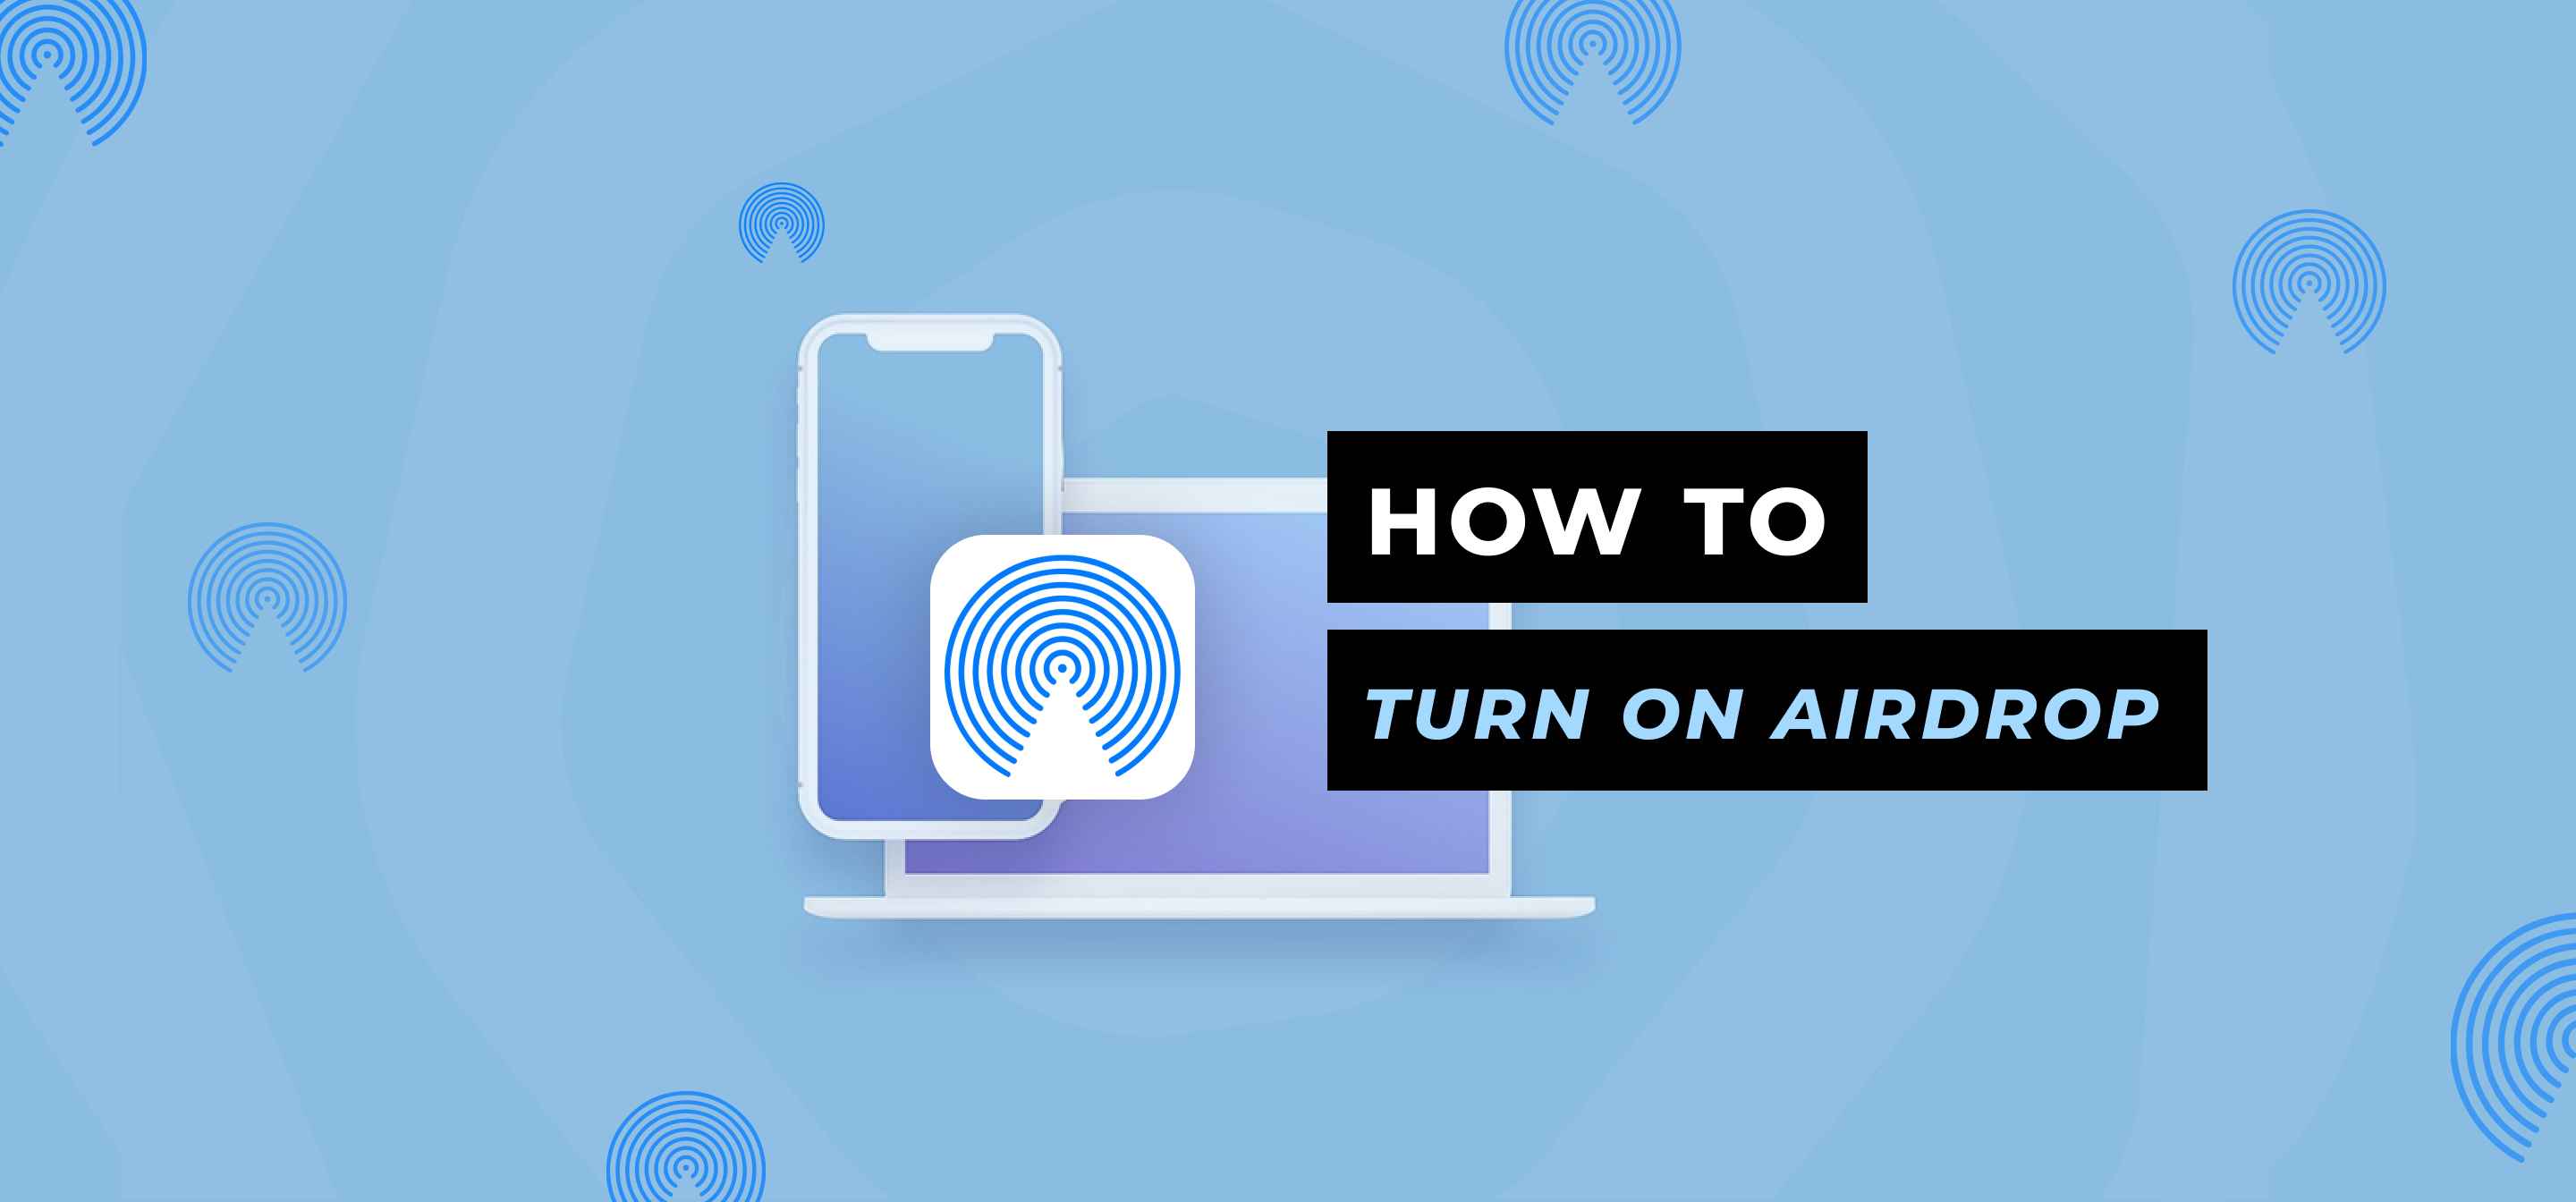 How to Turn on AirDrop on Mac, iPhone, or iPad